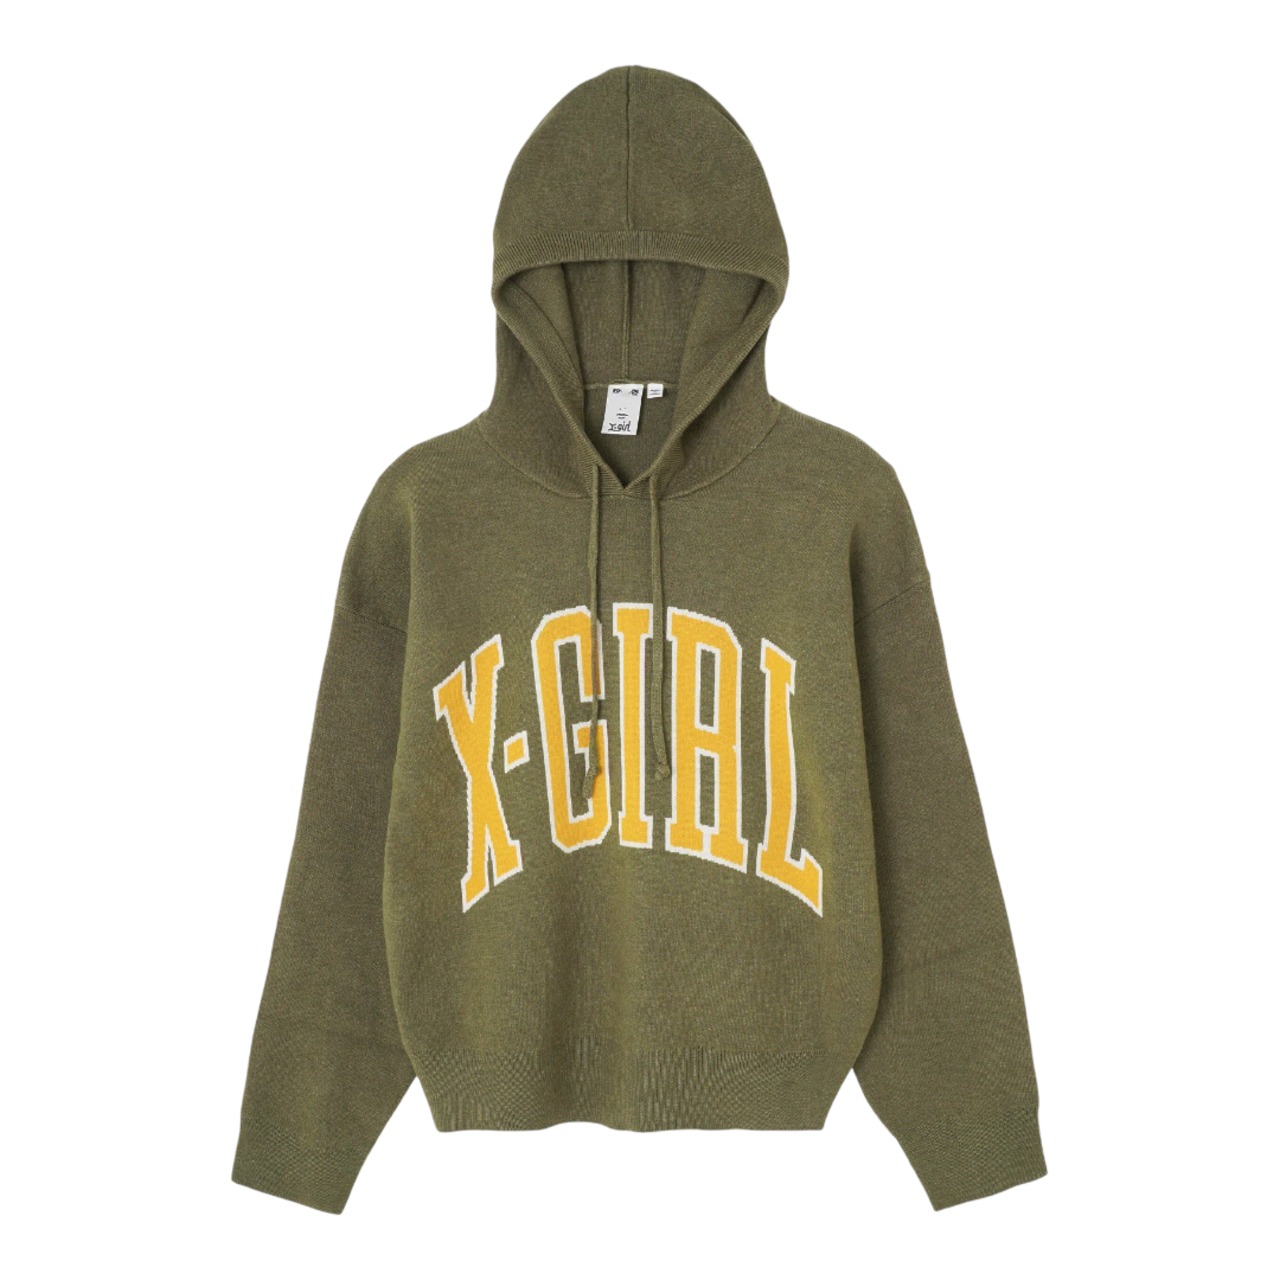 【X-girl】COLLEGE LOGO KNIT HOODIE 【エックスガール】